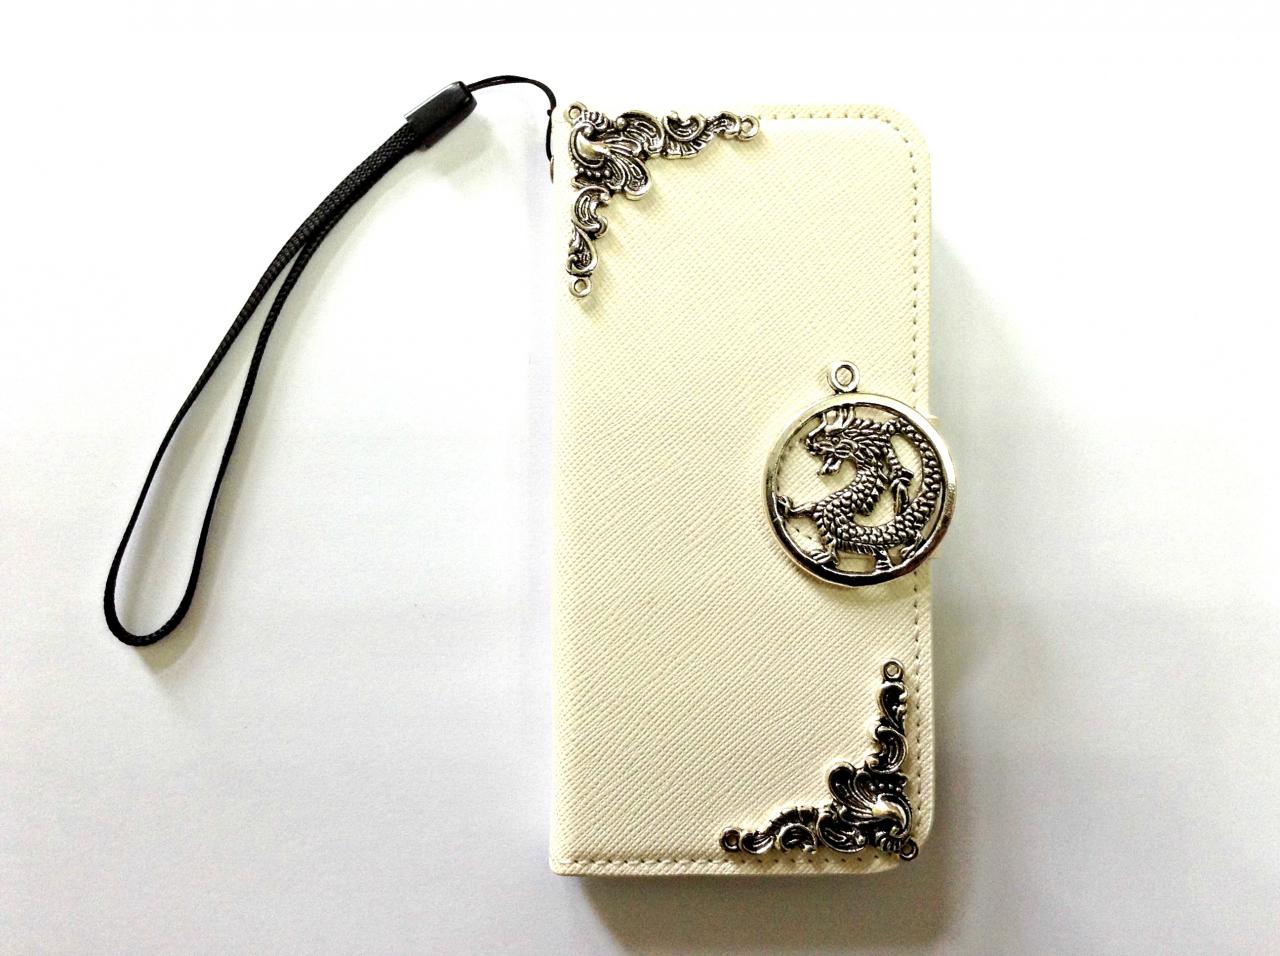 Dragon White Removable Phone Wallet, Iphone 6 4.7 Leather Wallet Case, Iphone 6 Plus Leather Wallet Case, Iphone 5 5s Leather Wallet Case, Iphone